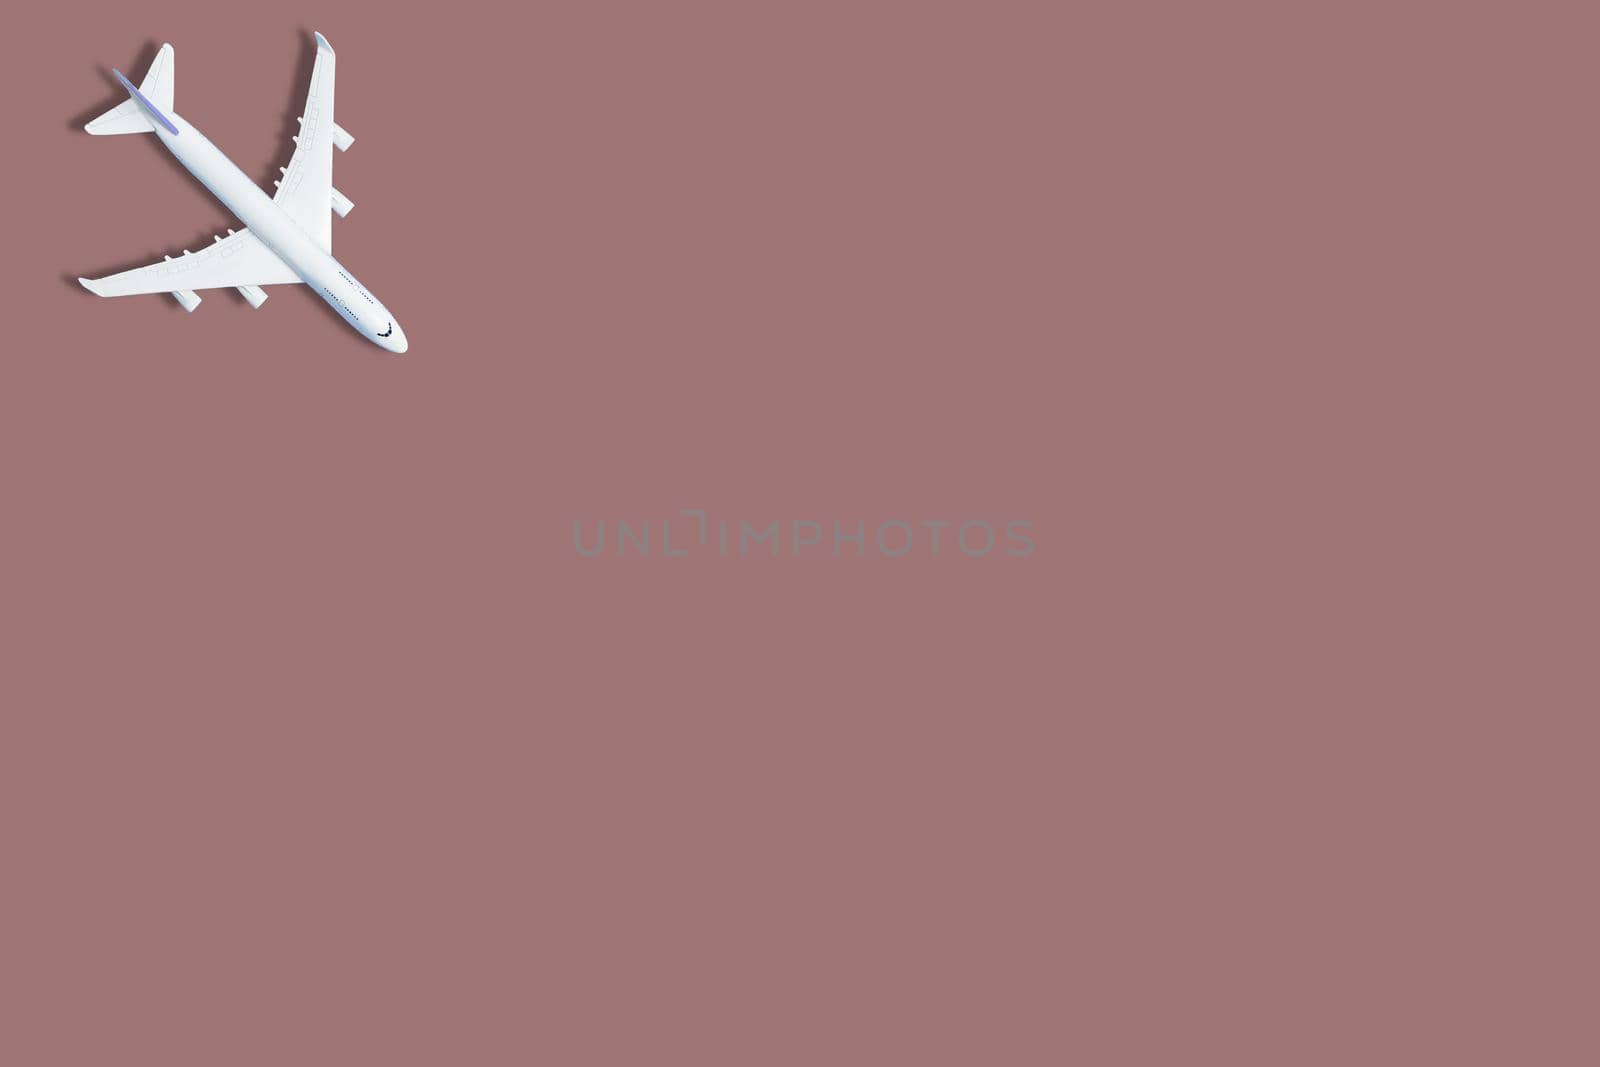 airplane figure on pink background 3d rendering by Andelov13